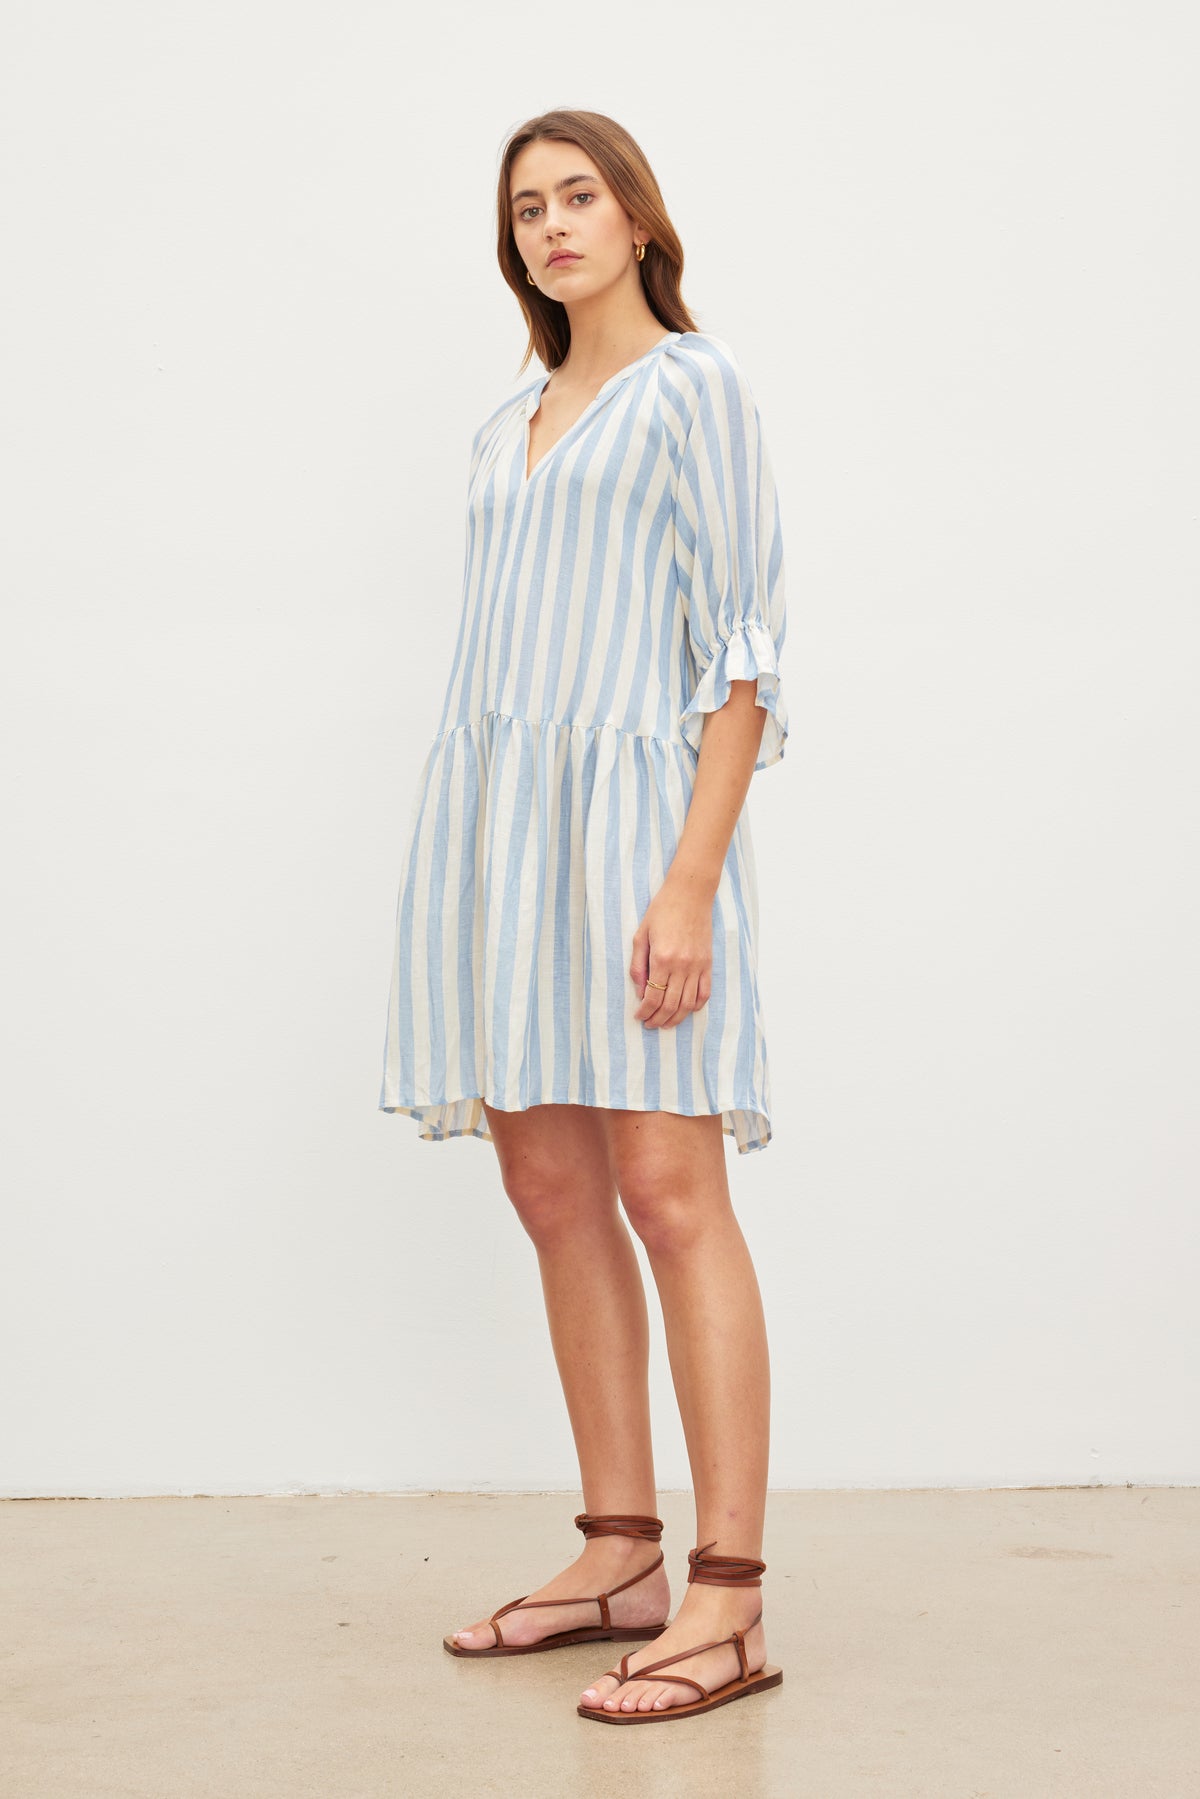   A woman posing in a Velvet by Graham & Spencer JESSICA STRIPED LINEN DRESS and flat sandals against a plain background. 